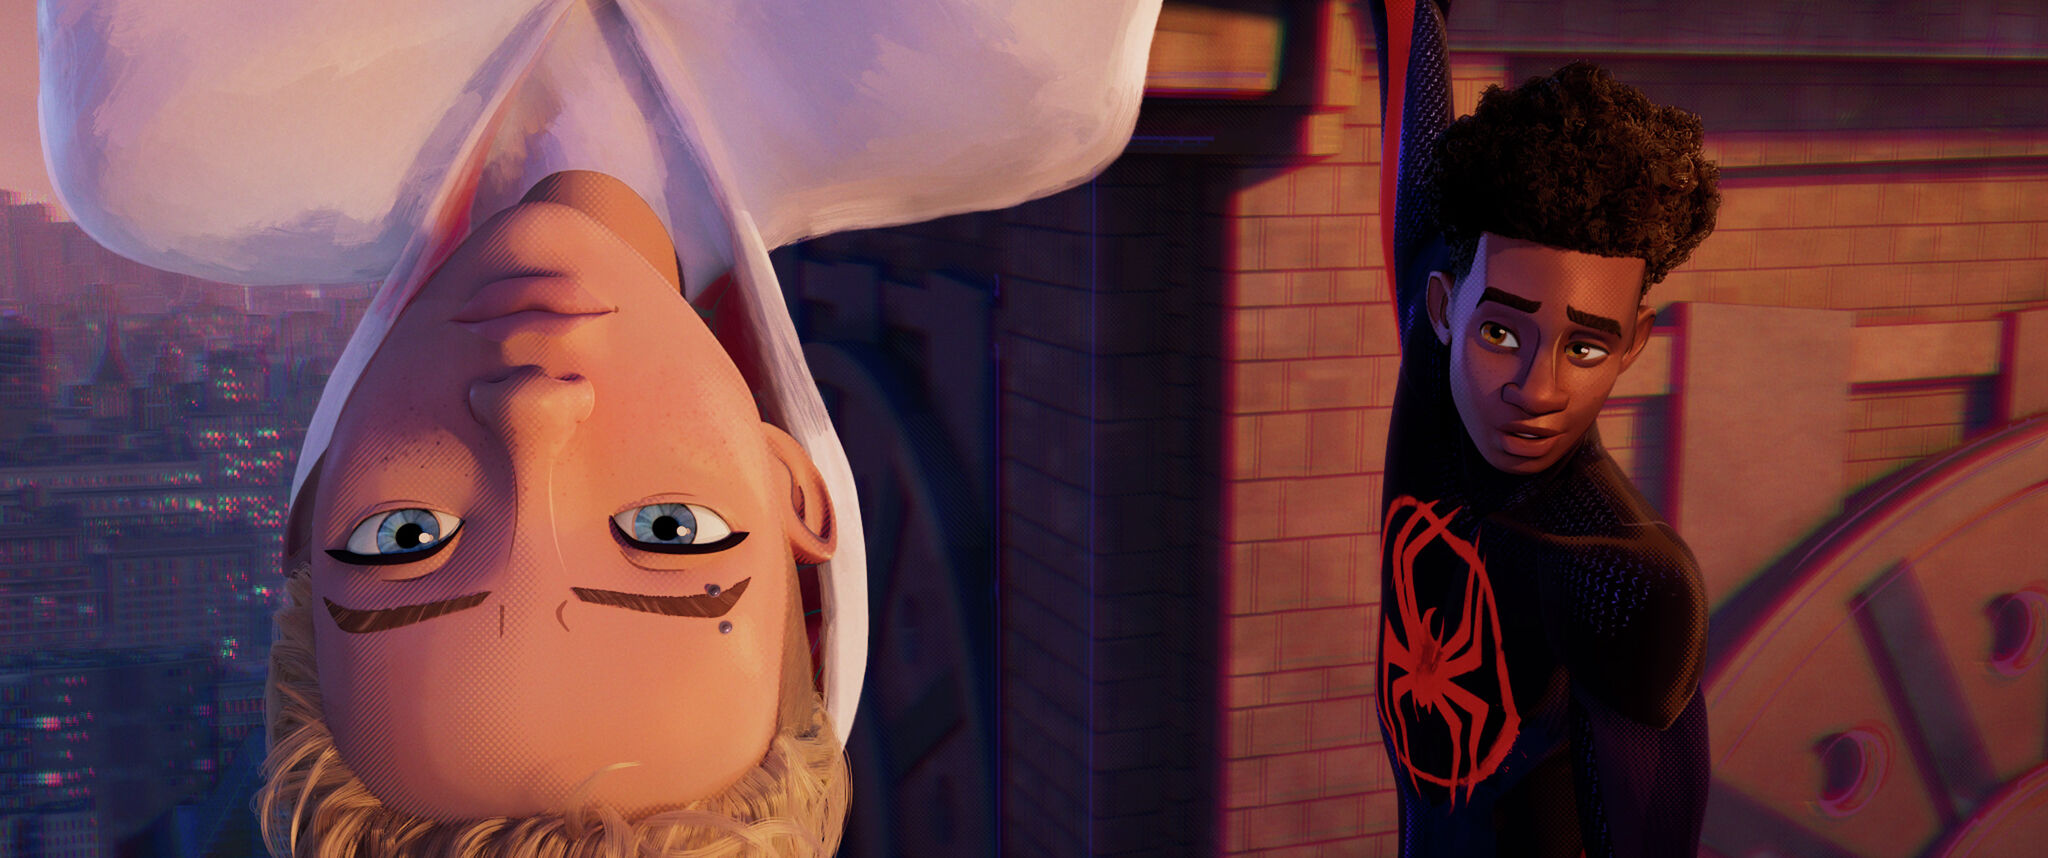 Spider-Man: Across the Spider-Verse swings onto Netflix very soon